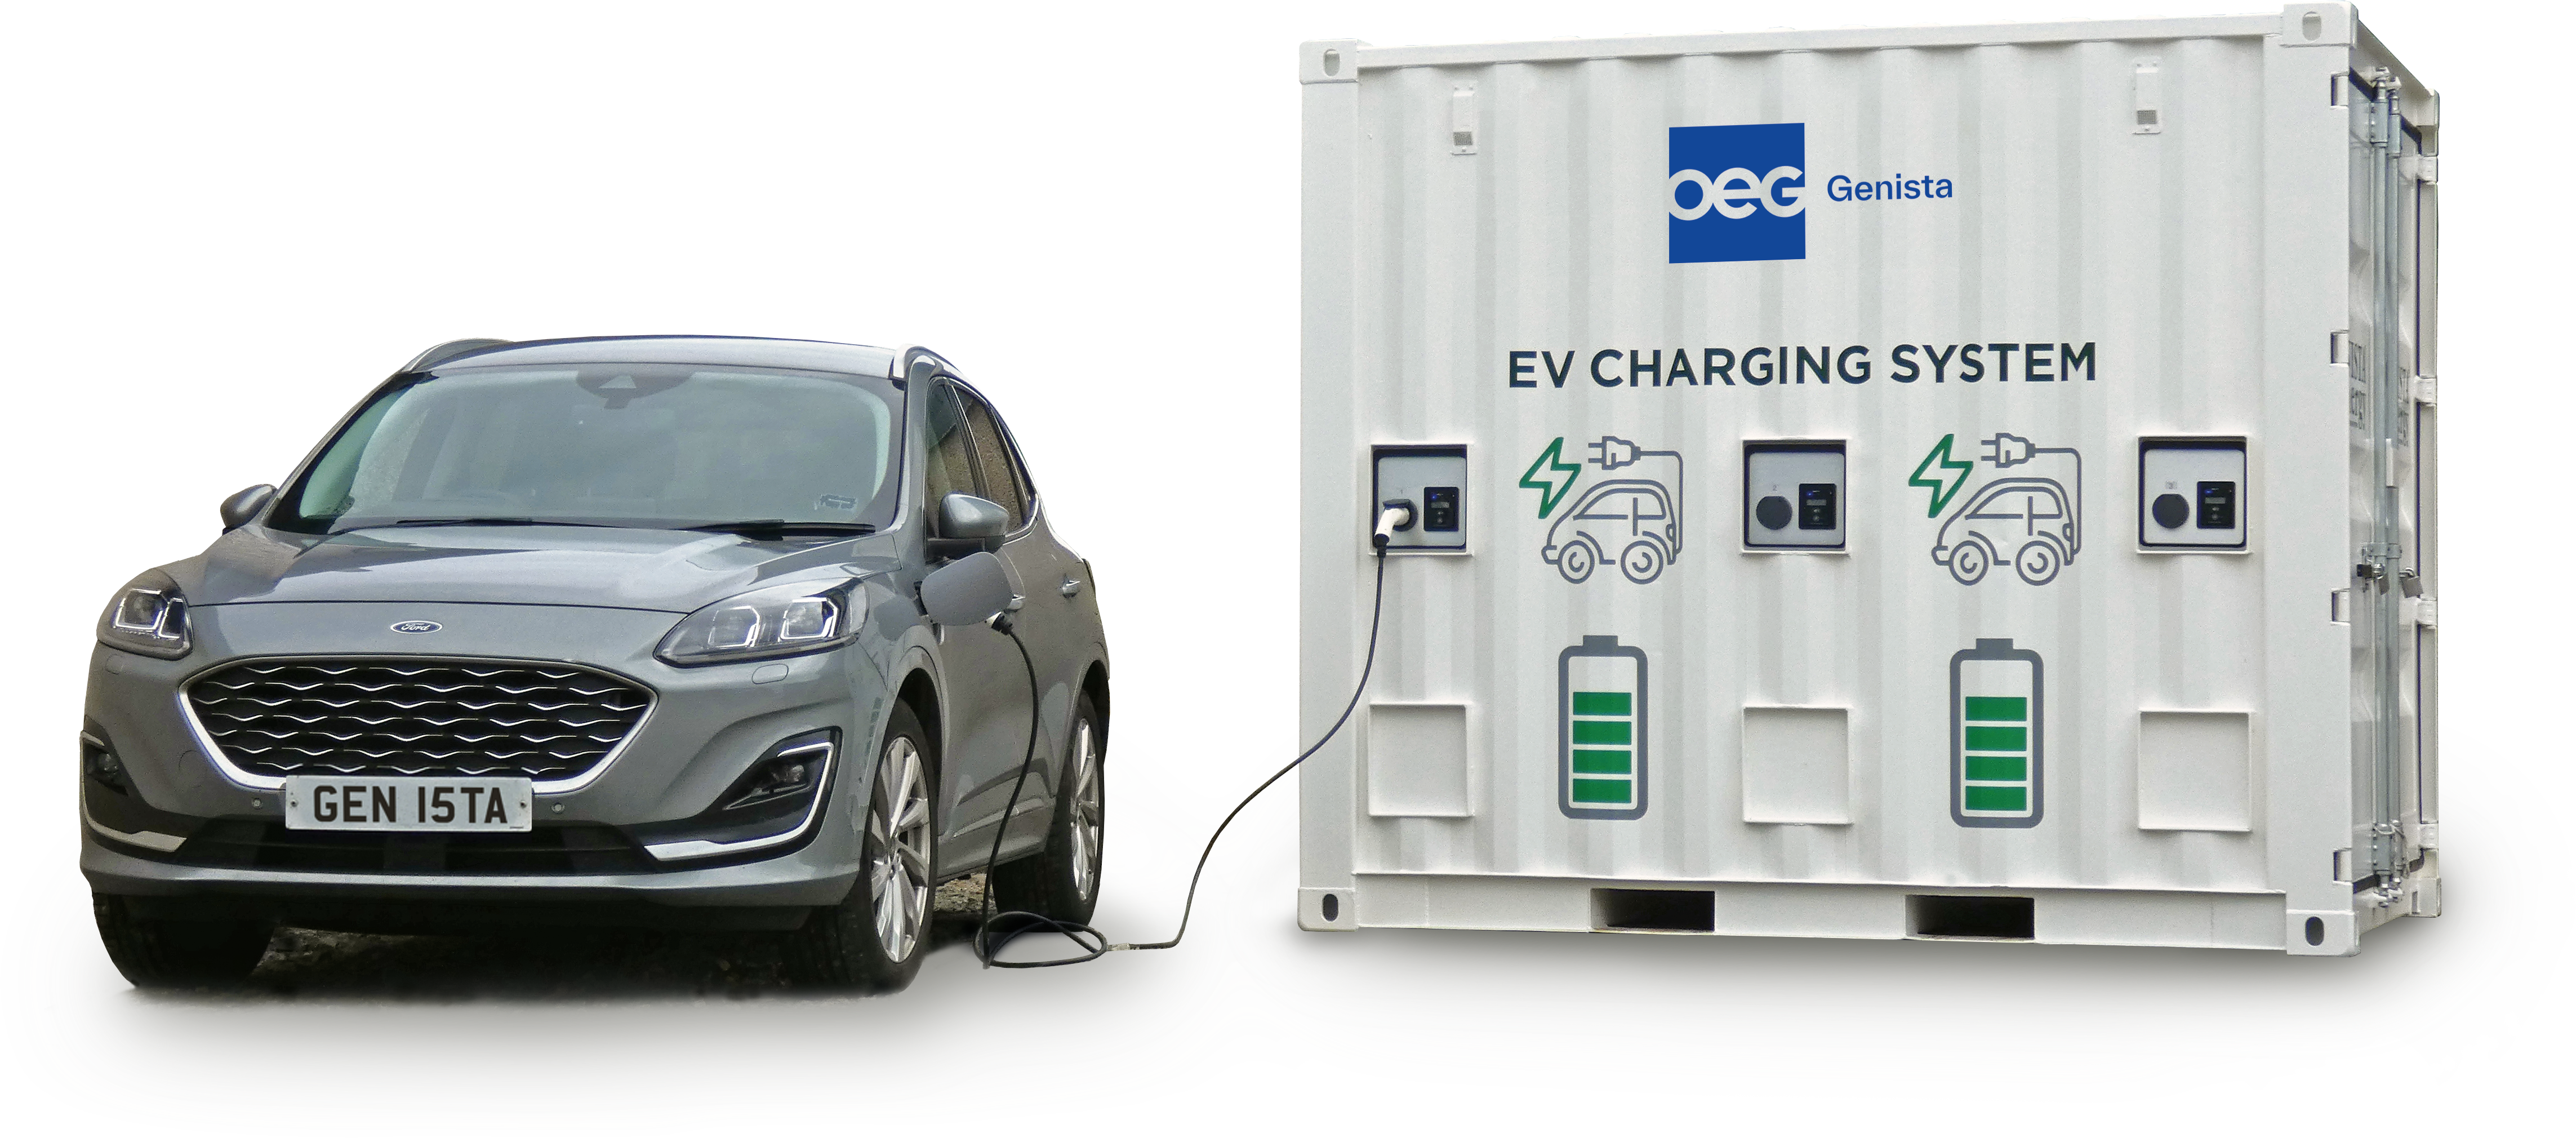 A flexible solution to EV Charging. The systems can be grid connected to a 63 amp 3 phase supply or totally off-grid utilizing our battery energy storage technology.